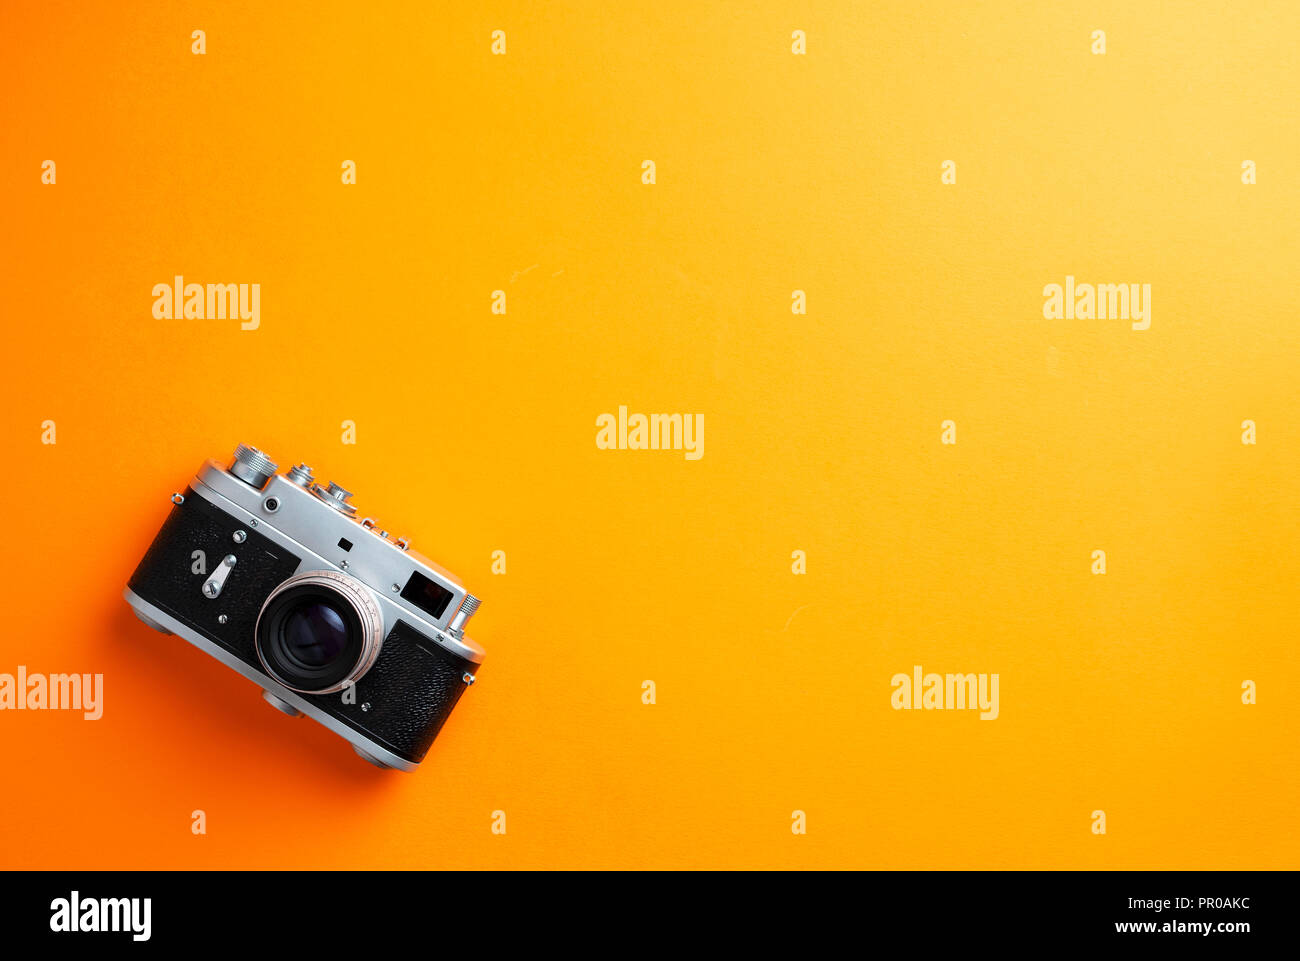 Vintage camera over orange background with negative space Stock Photo